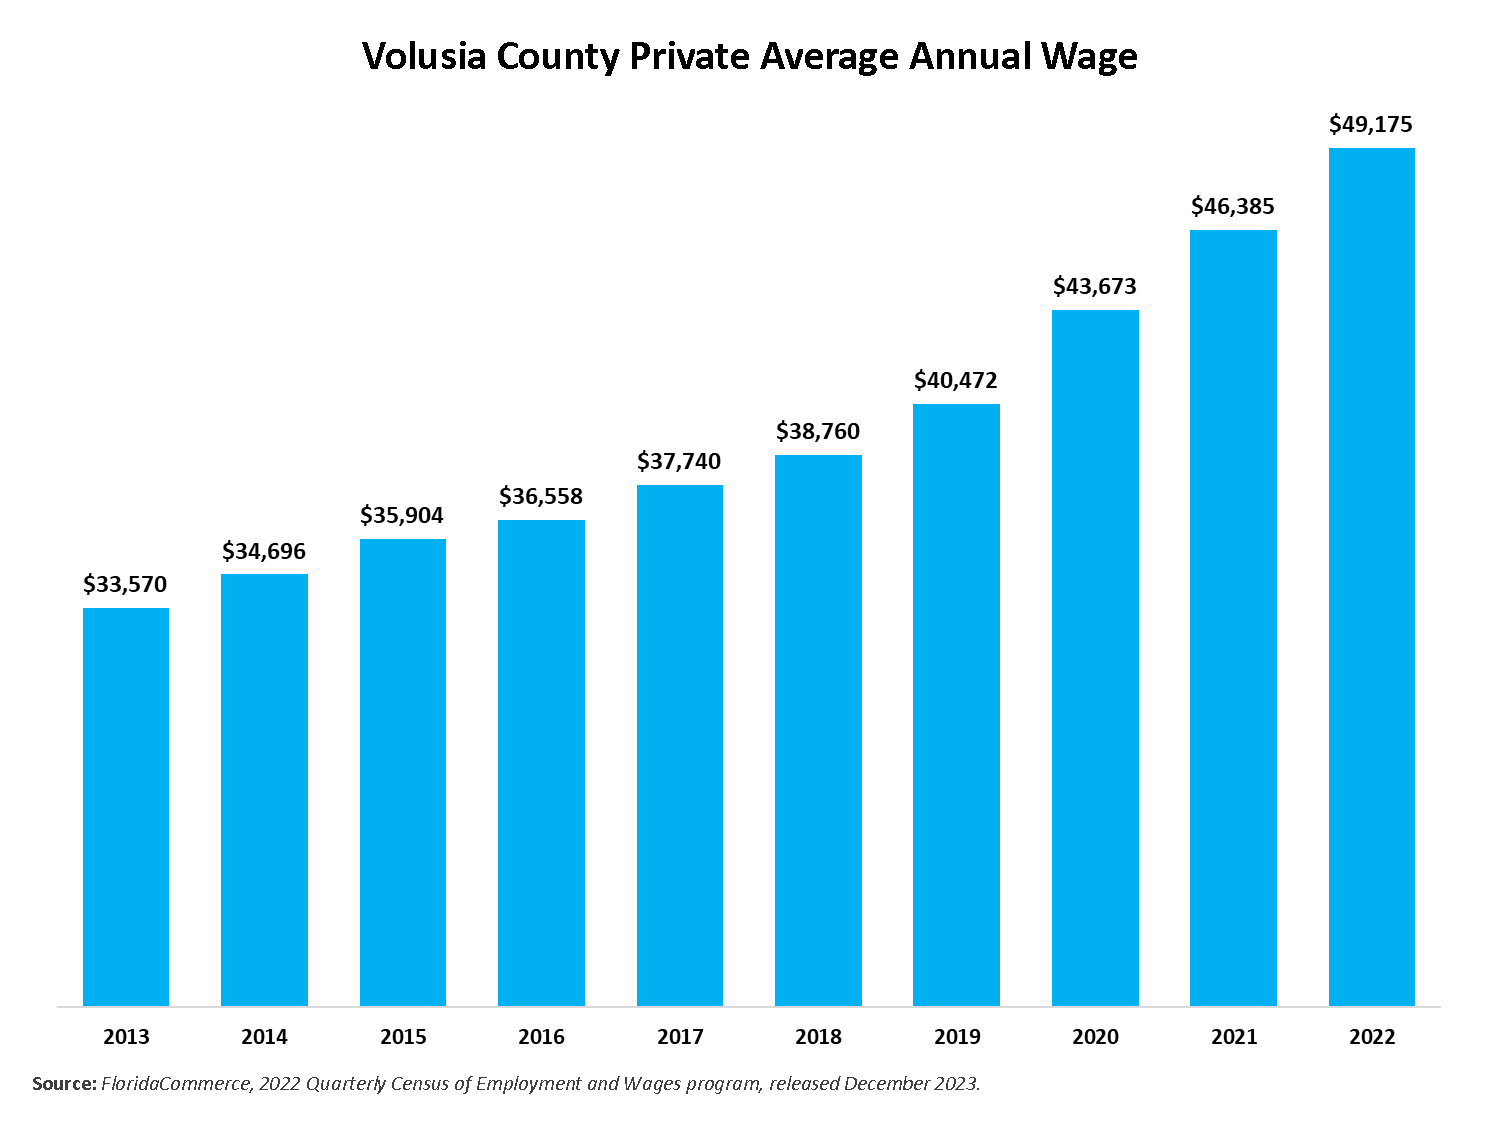 The chart shows Volusia County’s average annual wage trend from 2013 to 2022. Wages increased slightly from 2013 to 2014 and have increased steadily since 2014. 2014 wage was $34,696. 2015 was $35,904. 2016 was $36,558. 2017 was $37,740. 2018 was $38,760. 2019 was $40,472. 2020 was $43,673. 2021 was $46,385. 2022 average wage was $49,175 which increased 6% from 2021.